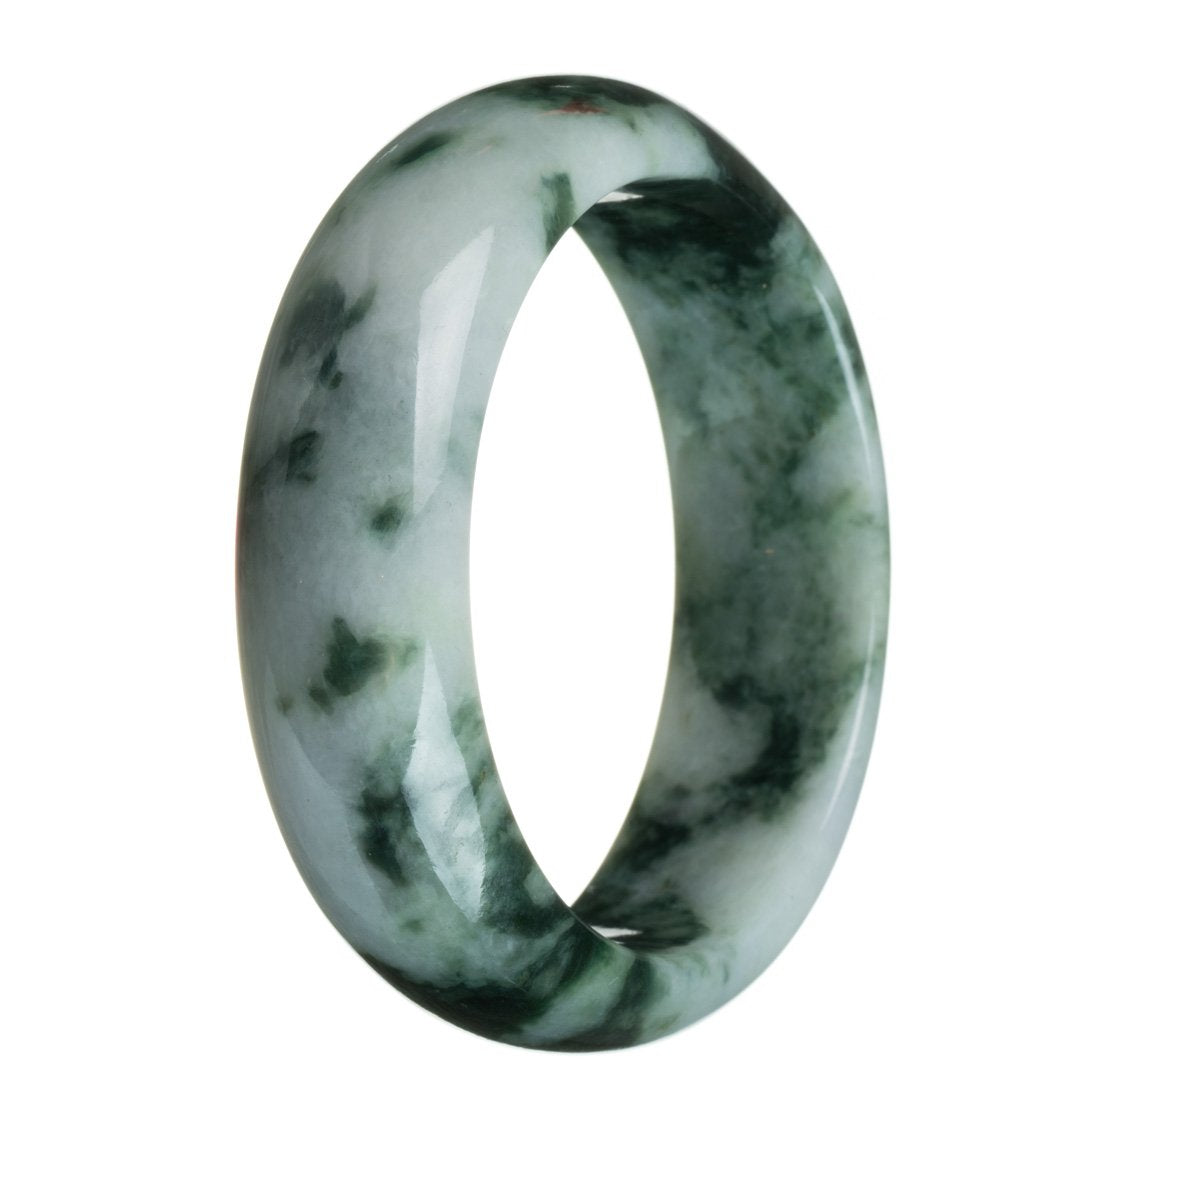 A close-up of a traditional jade bracelet with a half moon shape, featuring a genuine Type A Green pattern on a white background.